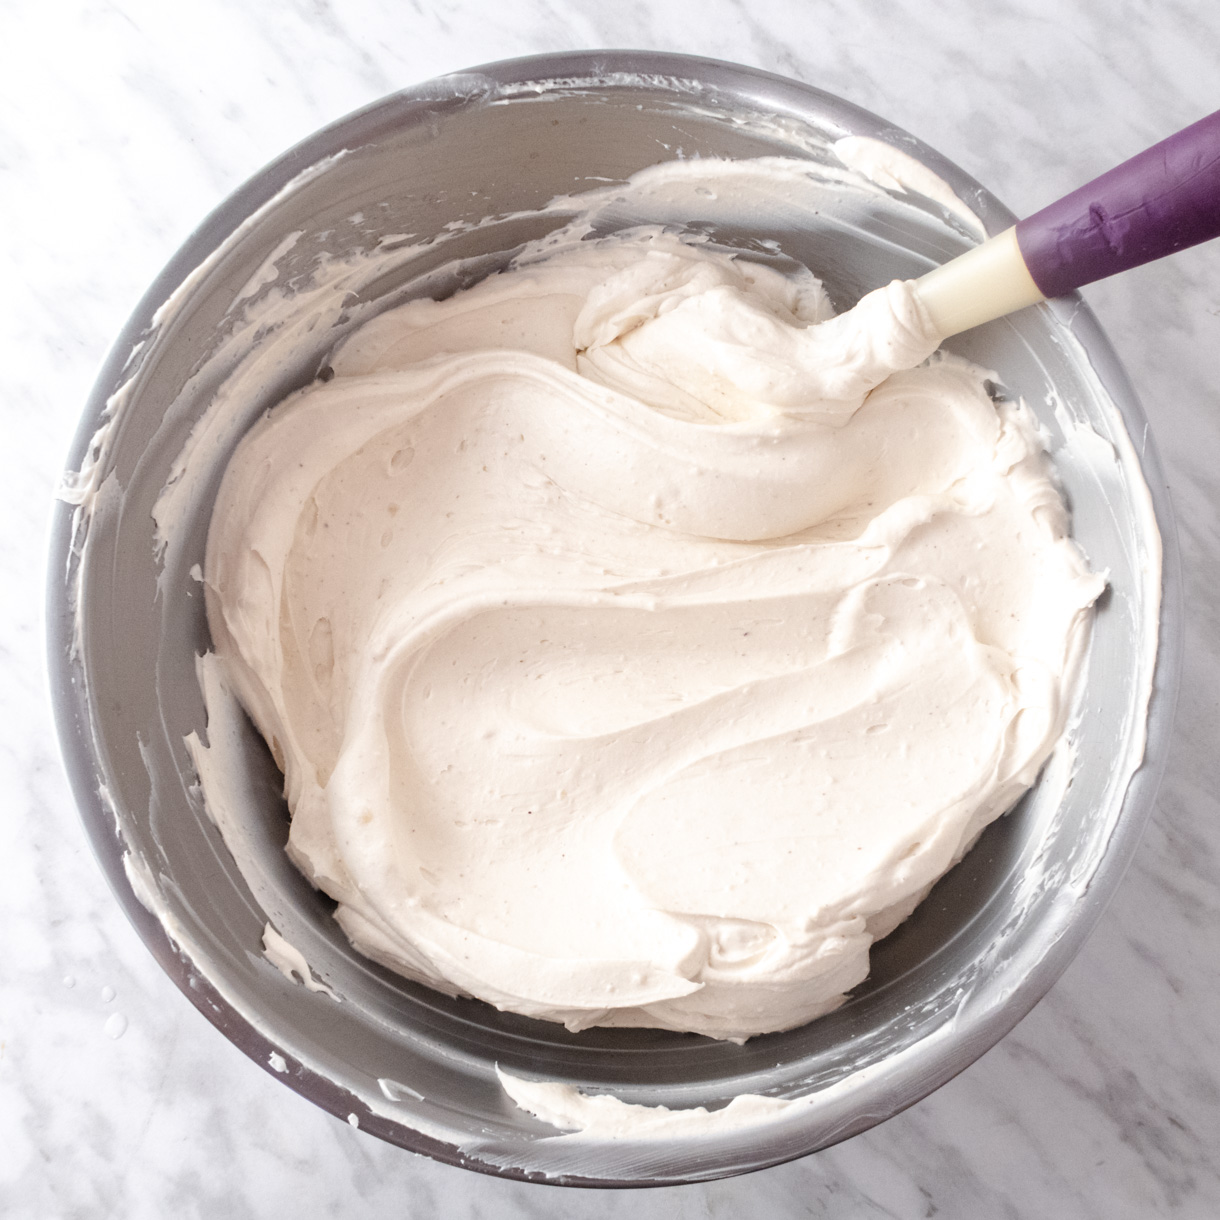 Diplomate cream in a mixing bowl with a silicone spatula.